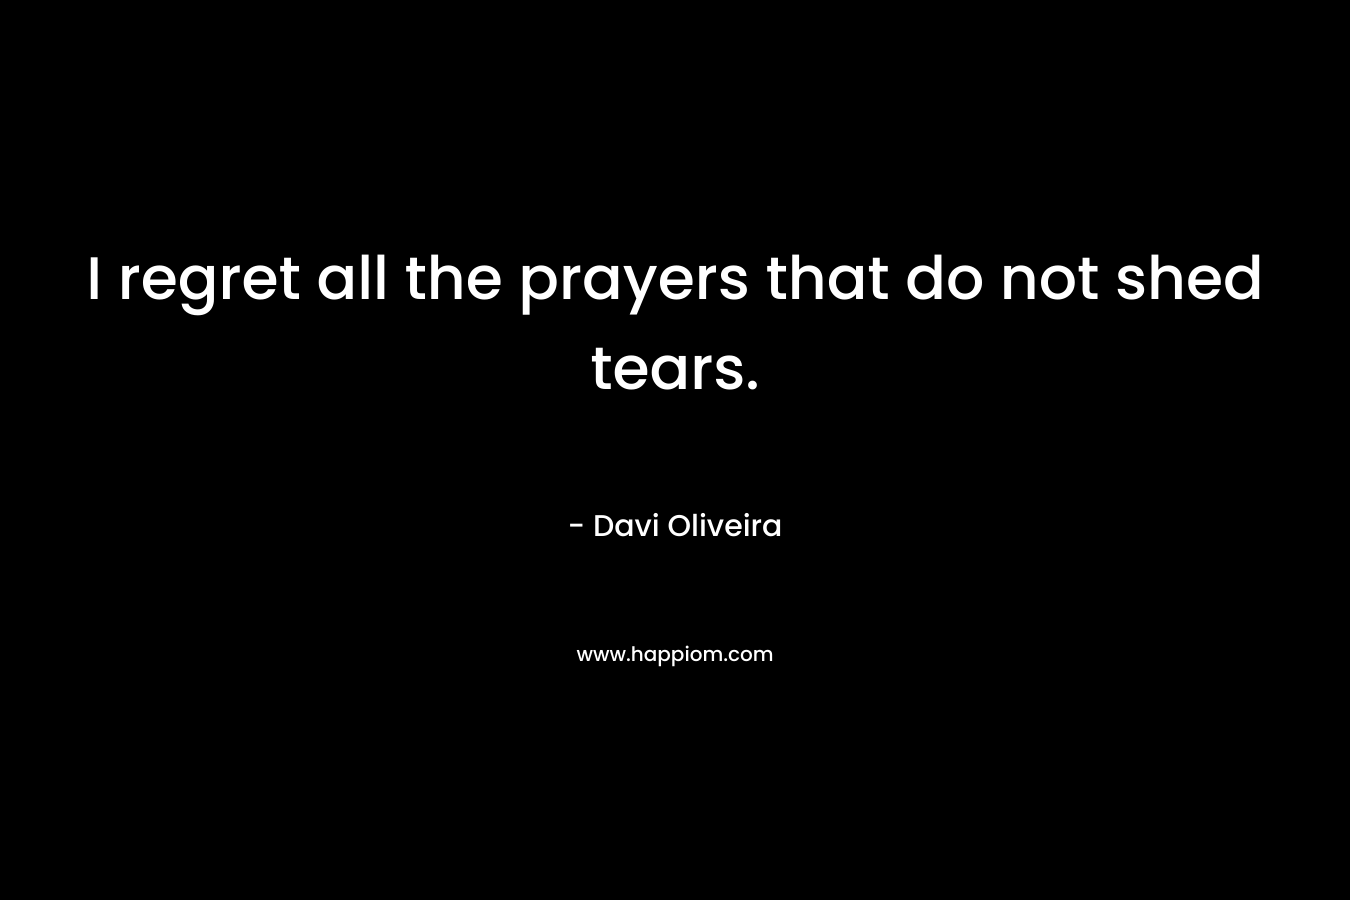 I regret all the prayers that do not shed tears. – Davi Oliveira